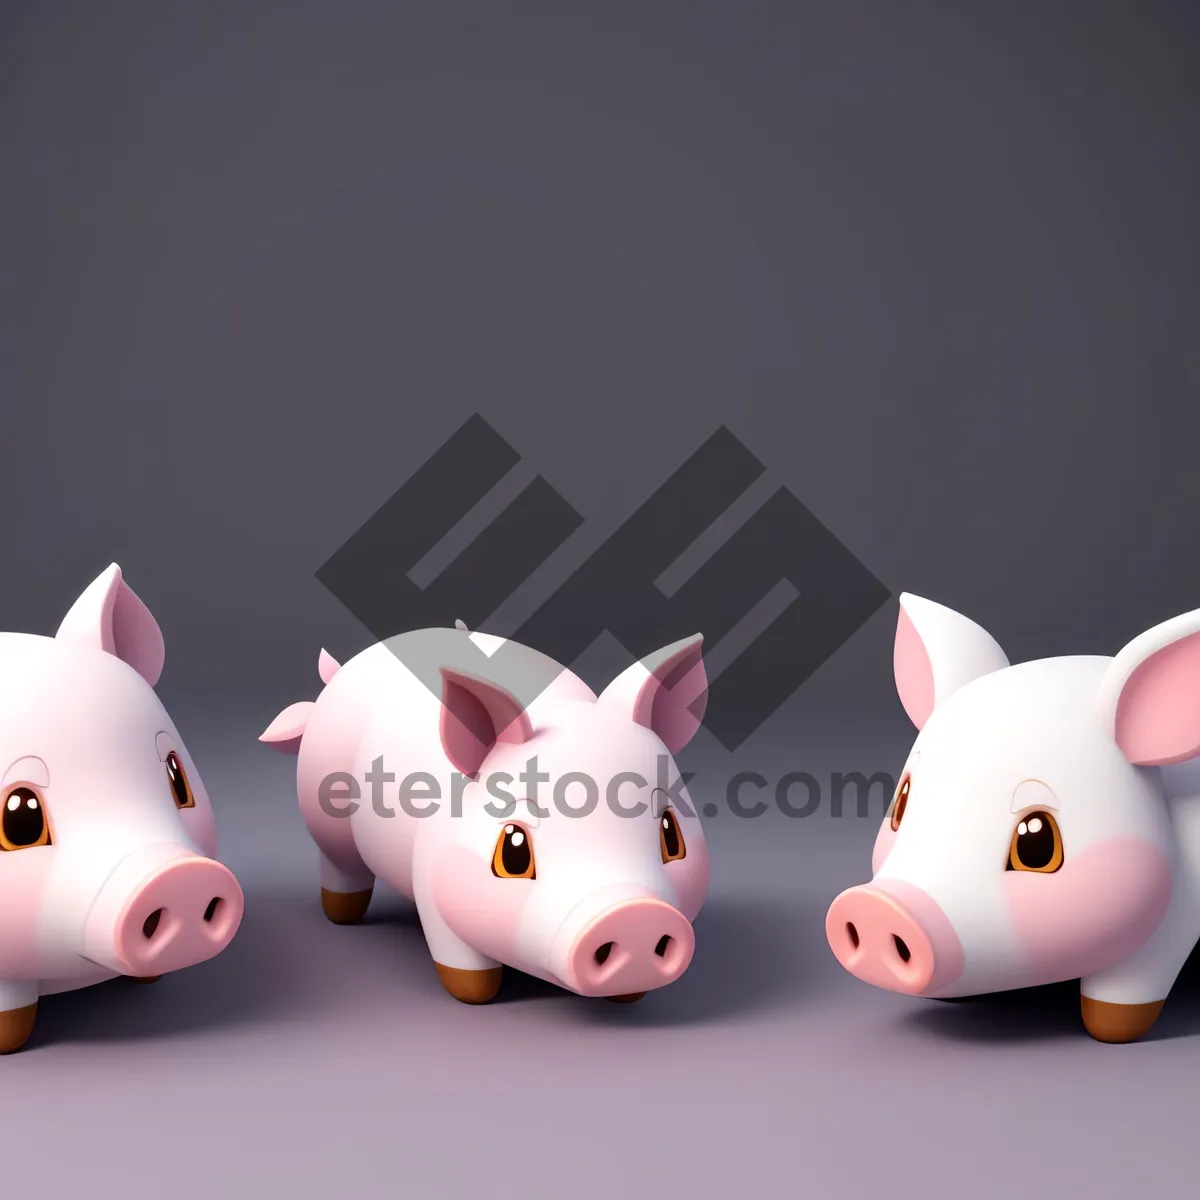 Picture of Pink Ceramic Piggy Bank - Saving for Financial Security